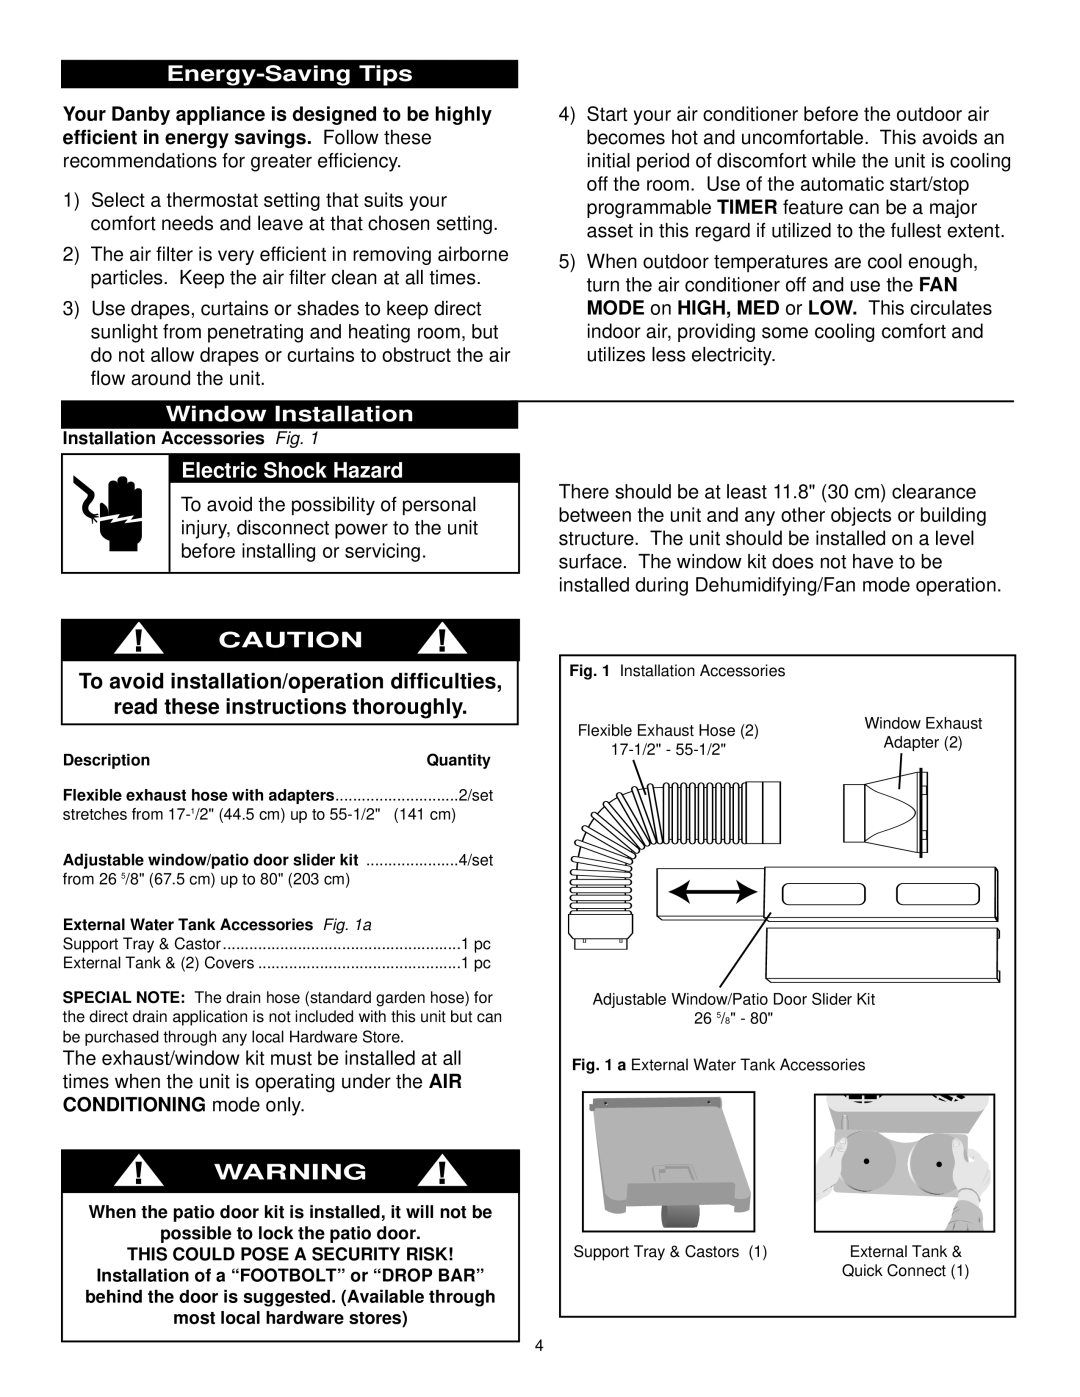 Danby DPAC10030 manual Energy-Saving Tips, Window Installation, Electric Shock Hazard, read these instructions thoroughly 